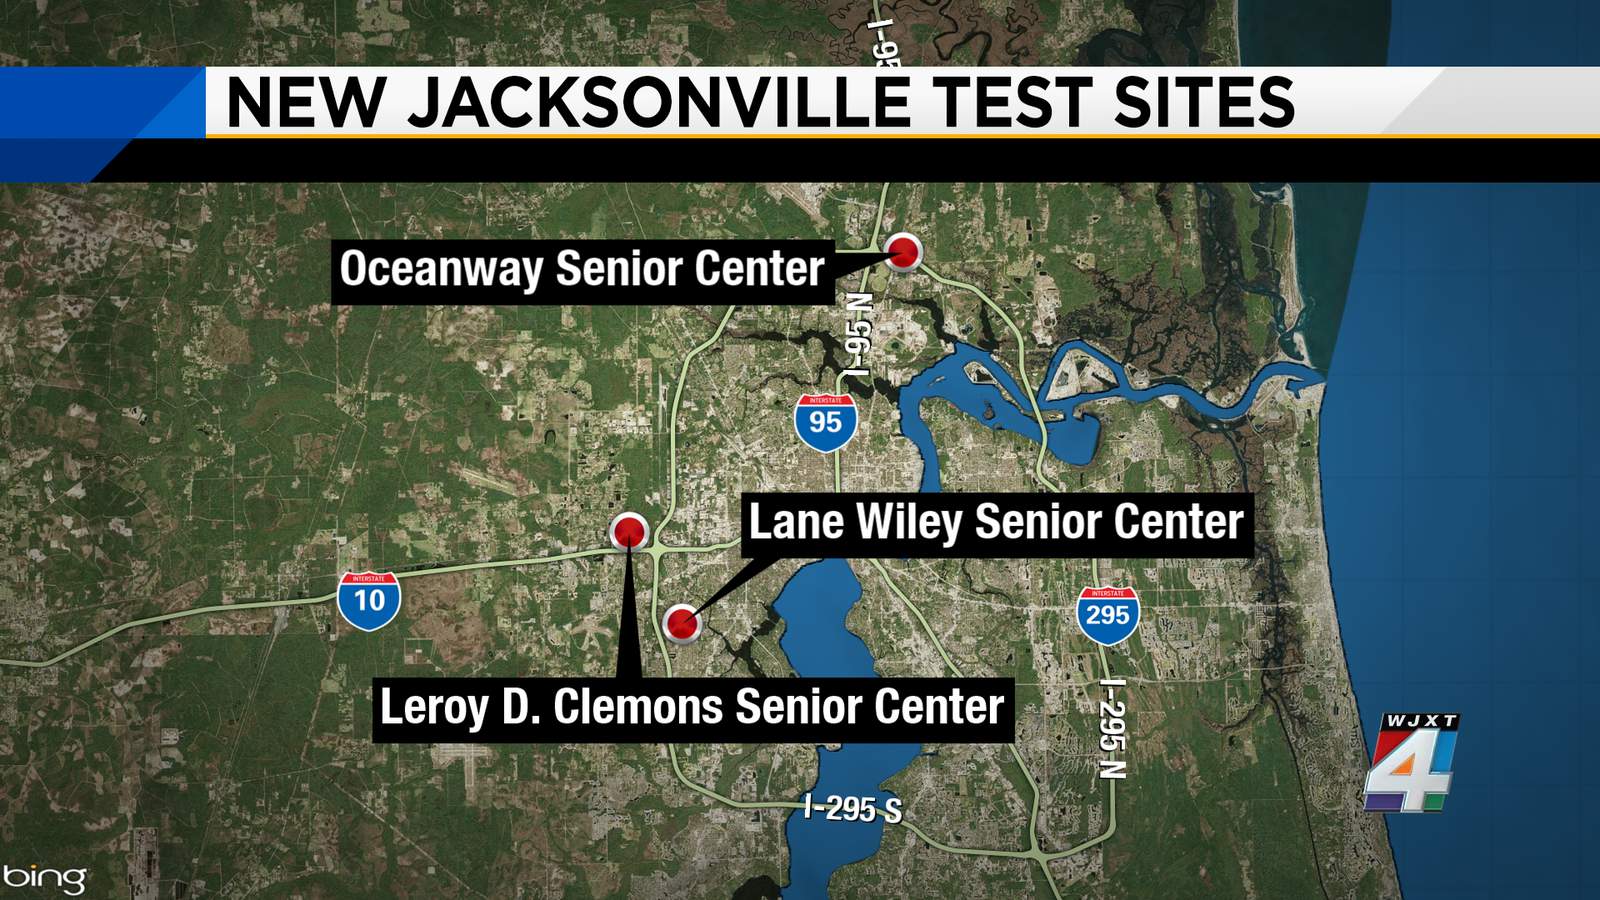 City of Jacksonville opens 3 new COVID-19 testing sites